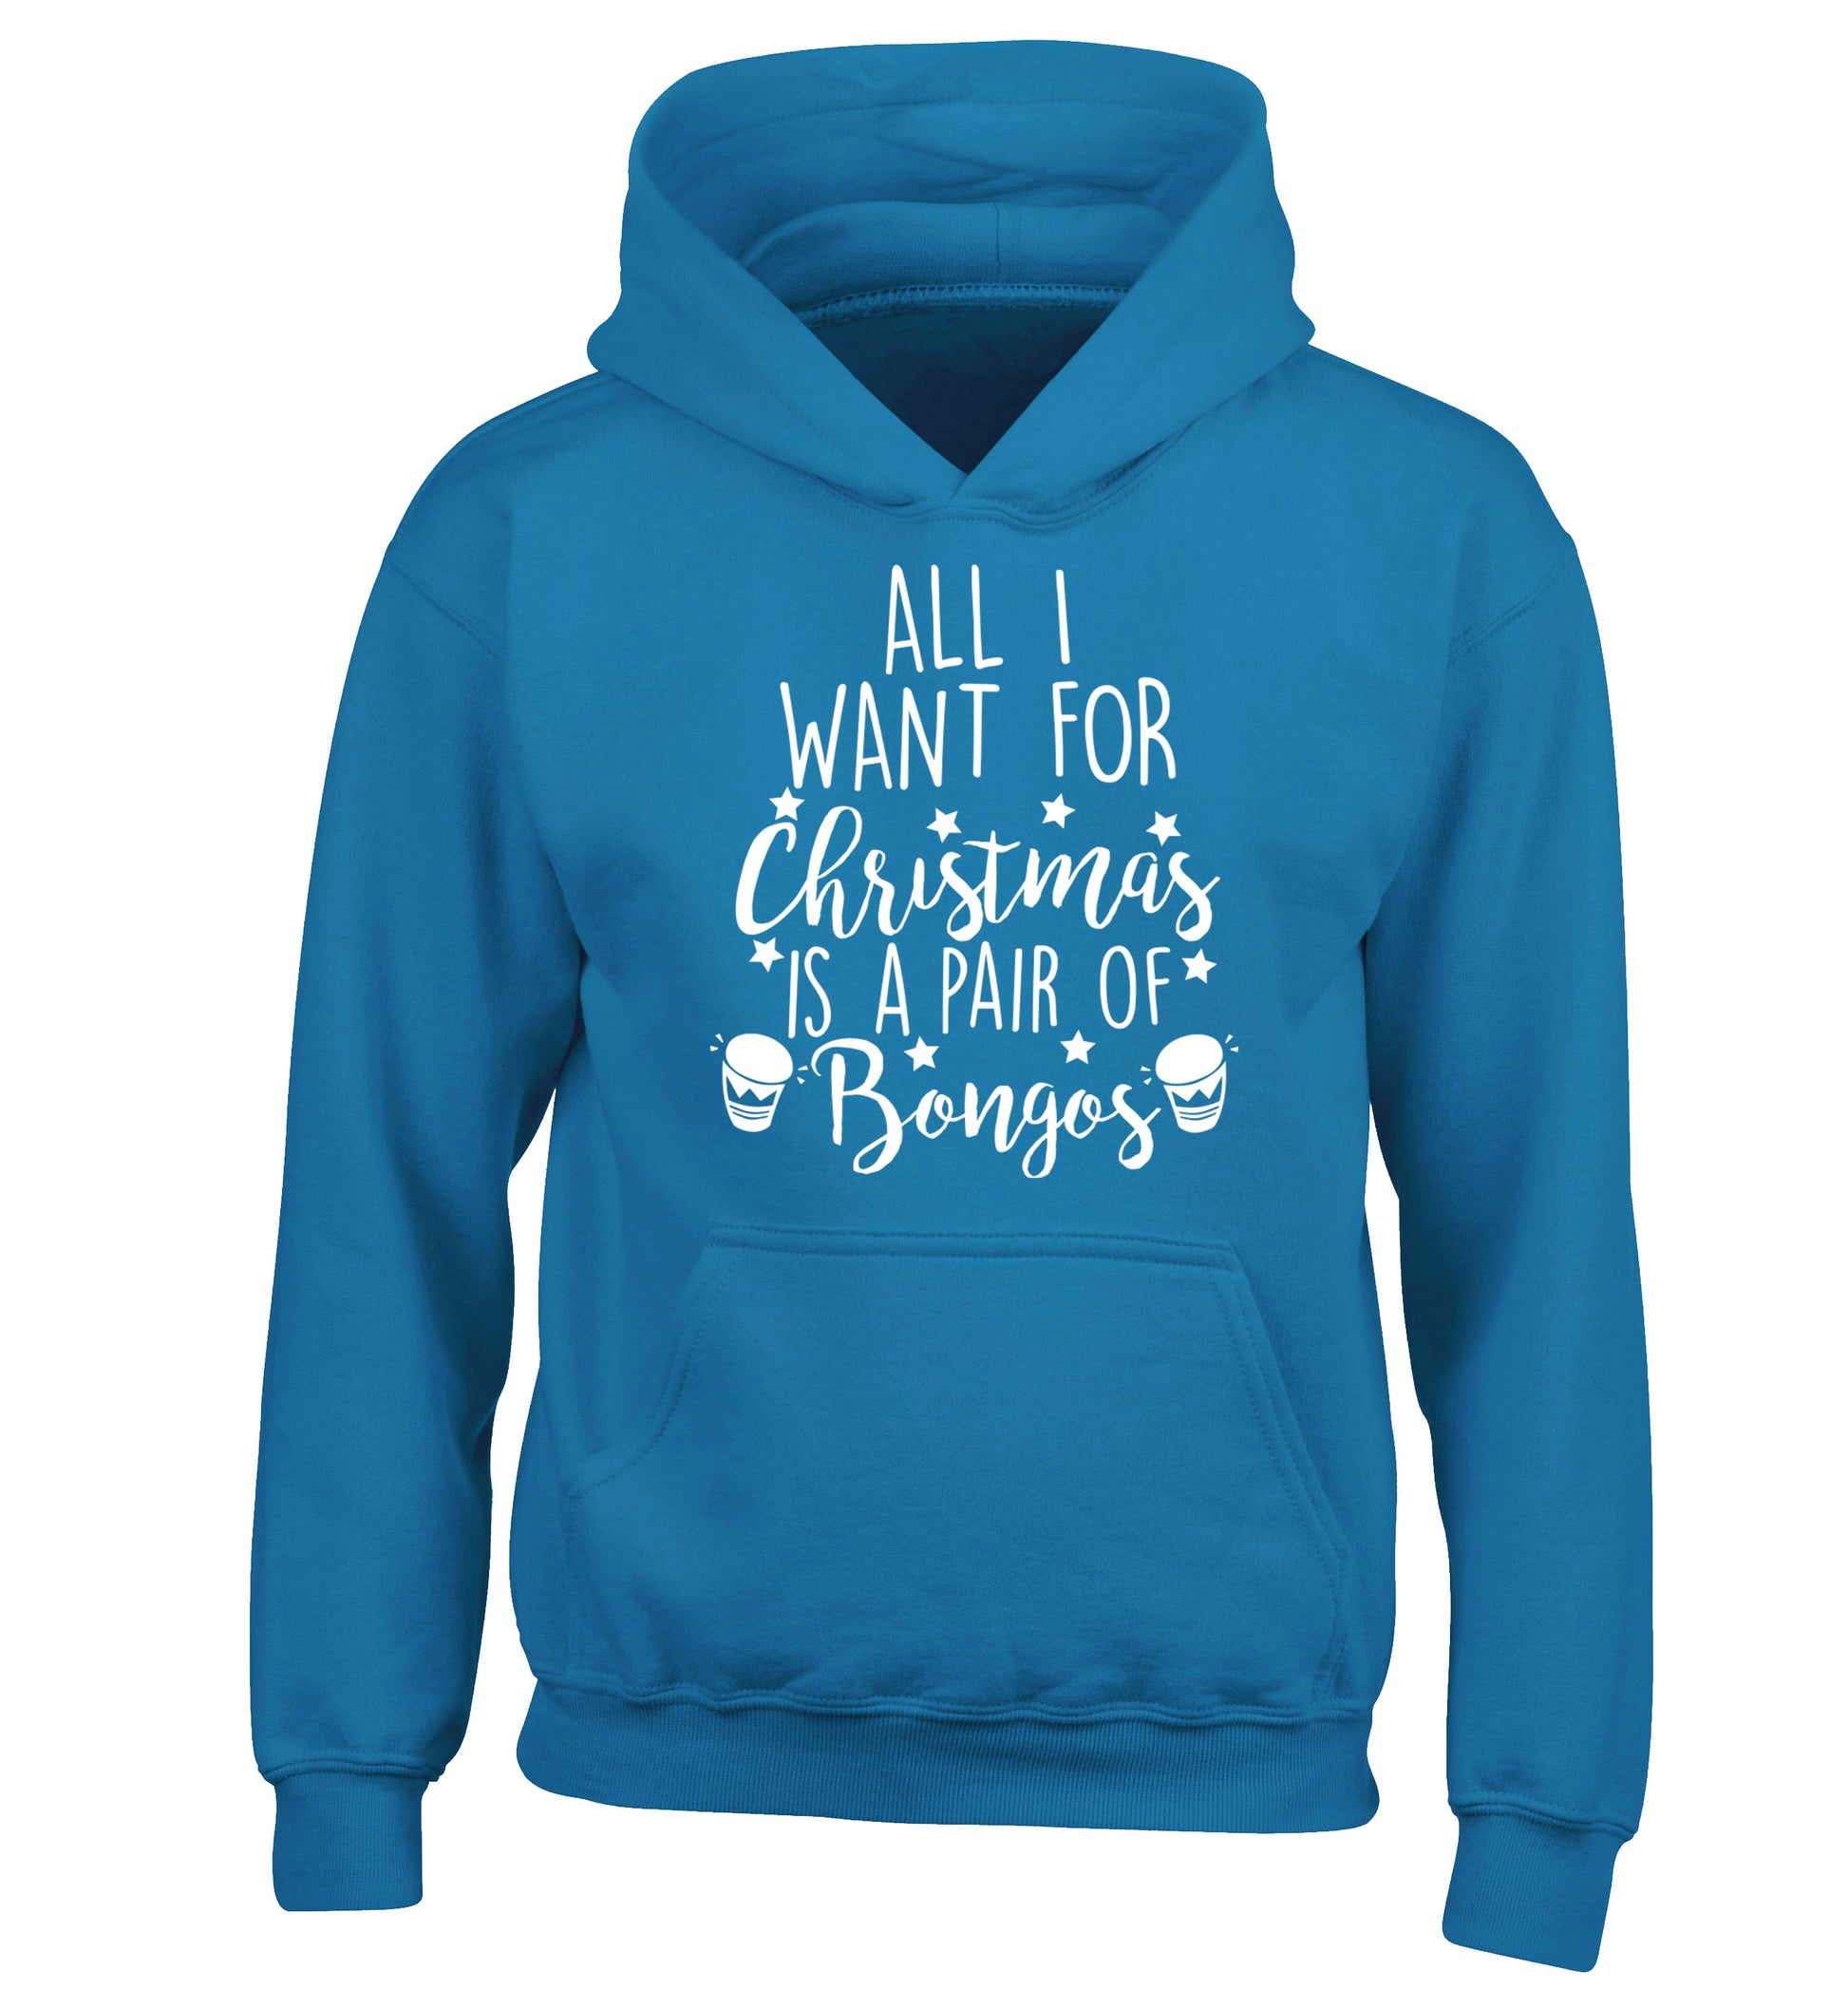 All I want for Christmas is a pair of bongos! children's blue hoodie 12-14 Years